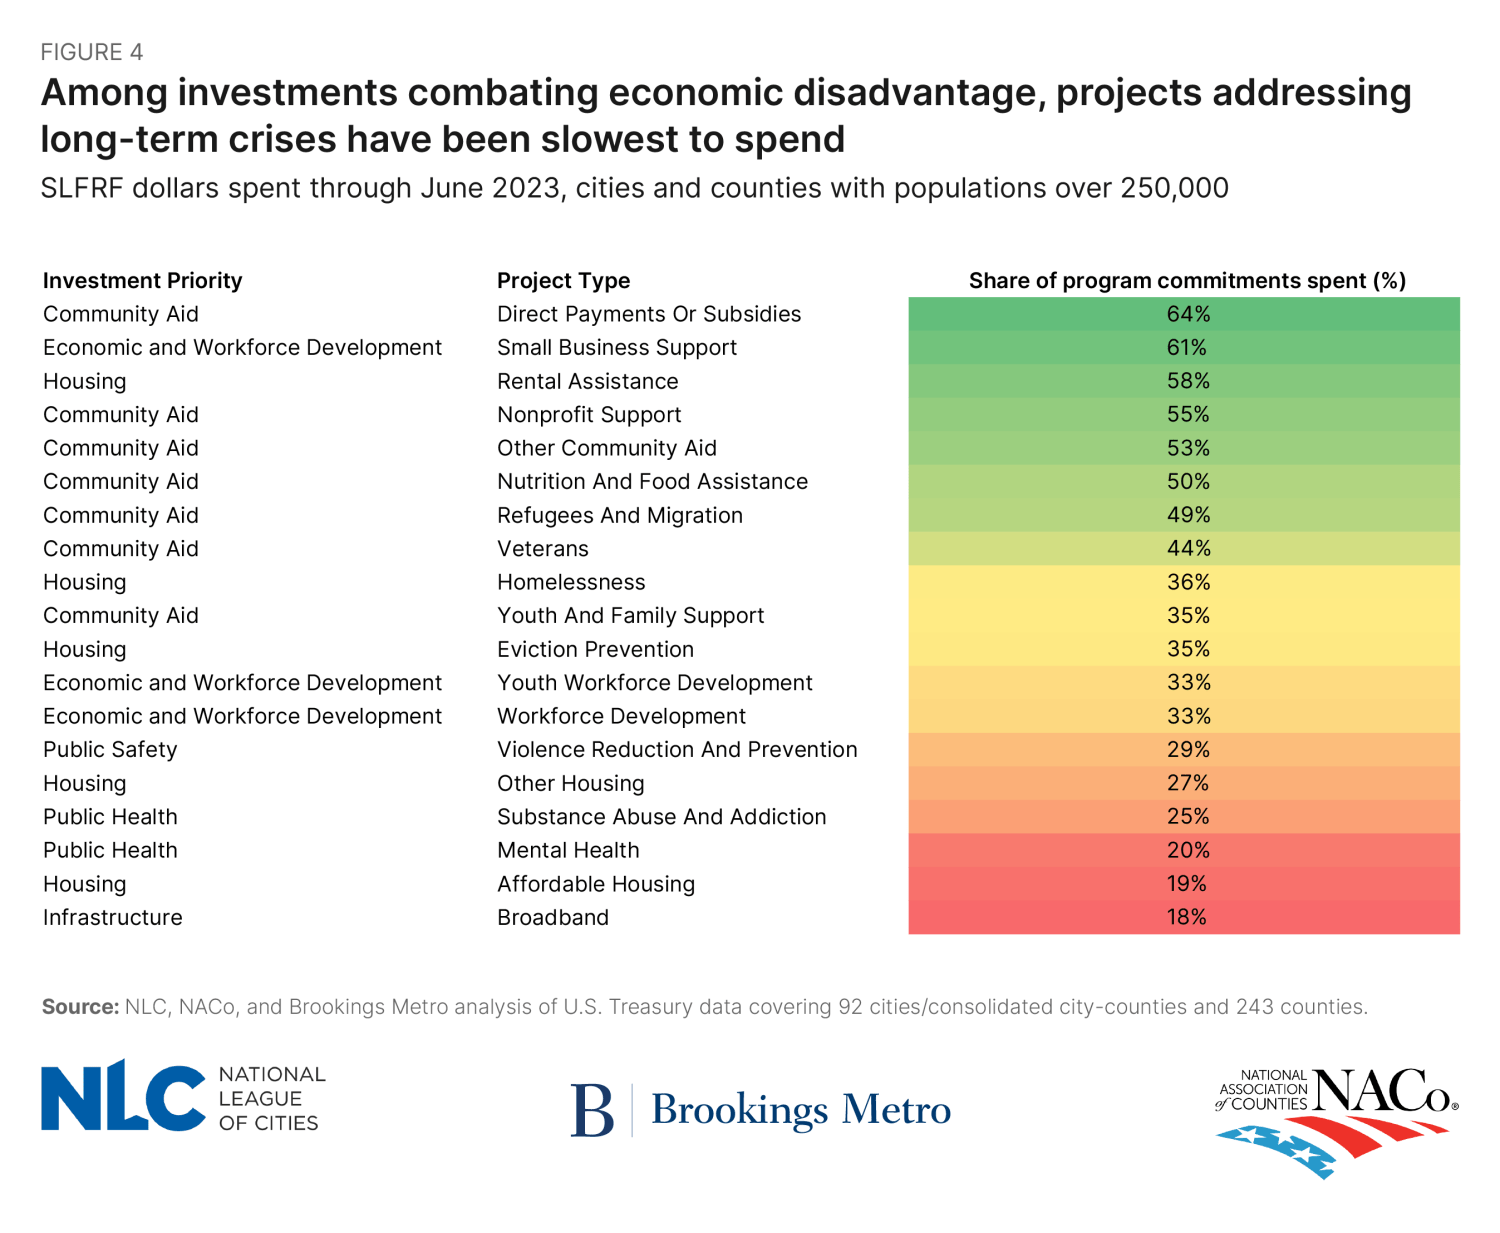 Figure 4: Among investments combating economic disadvantage, projects addressing long-term crises have been slowest to spend